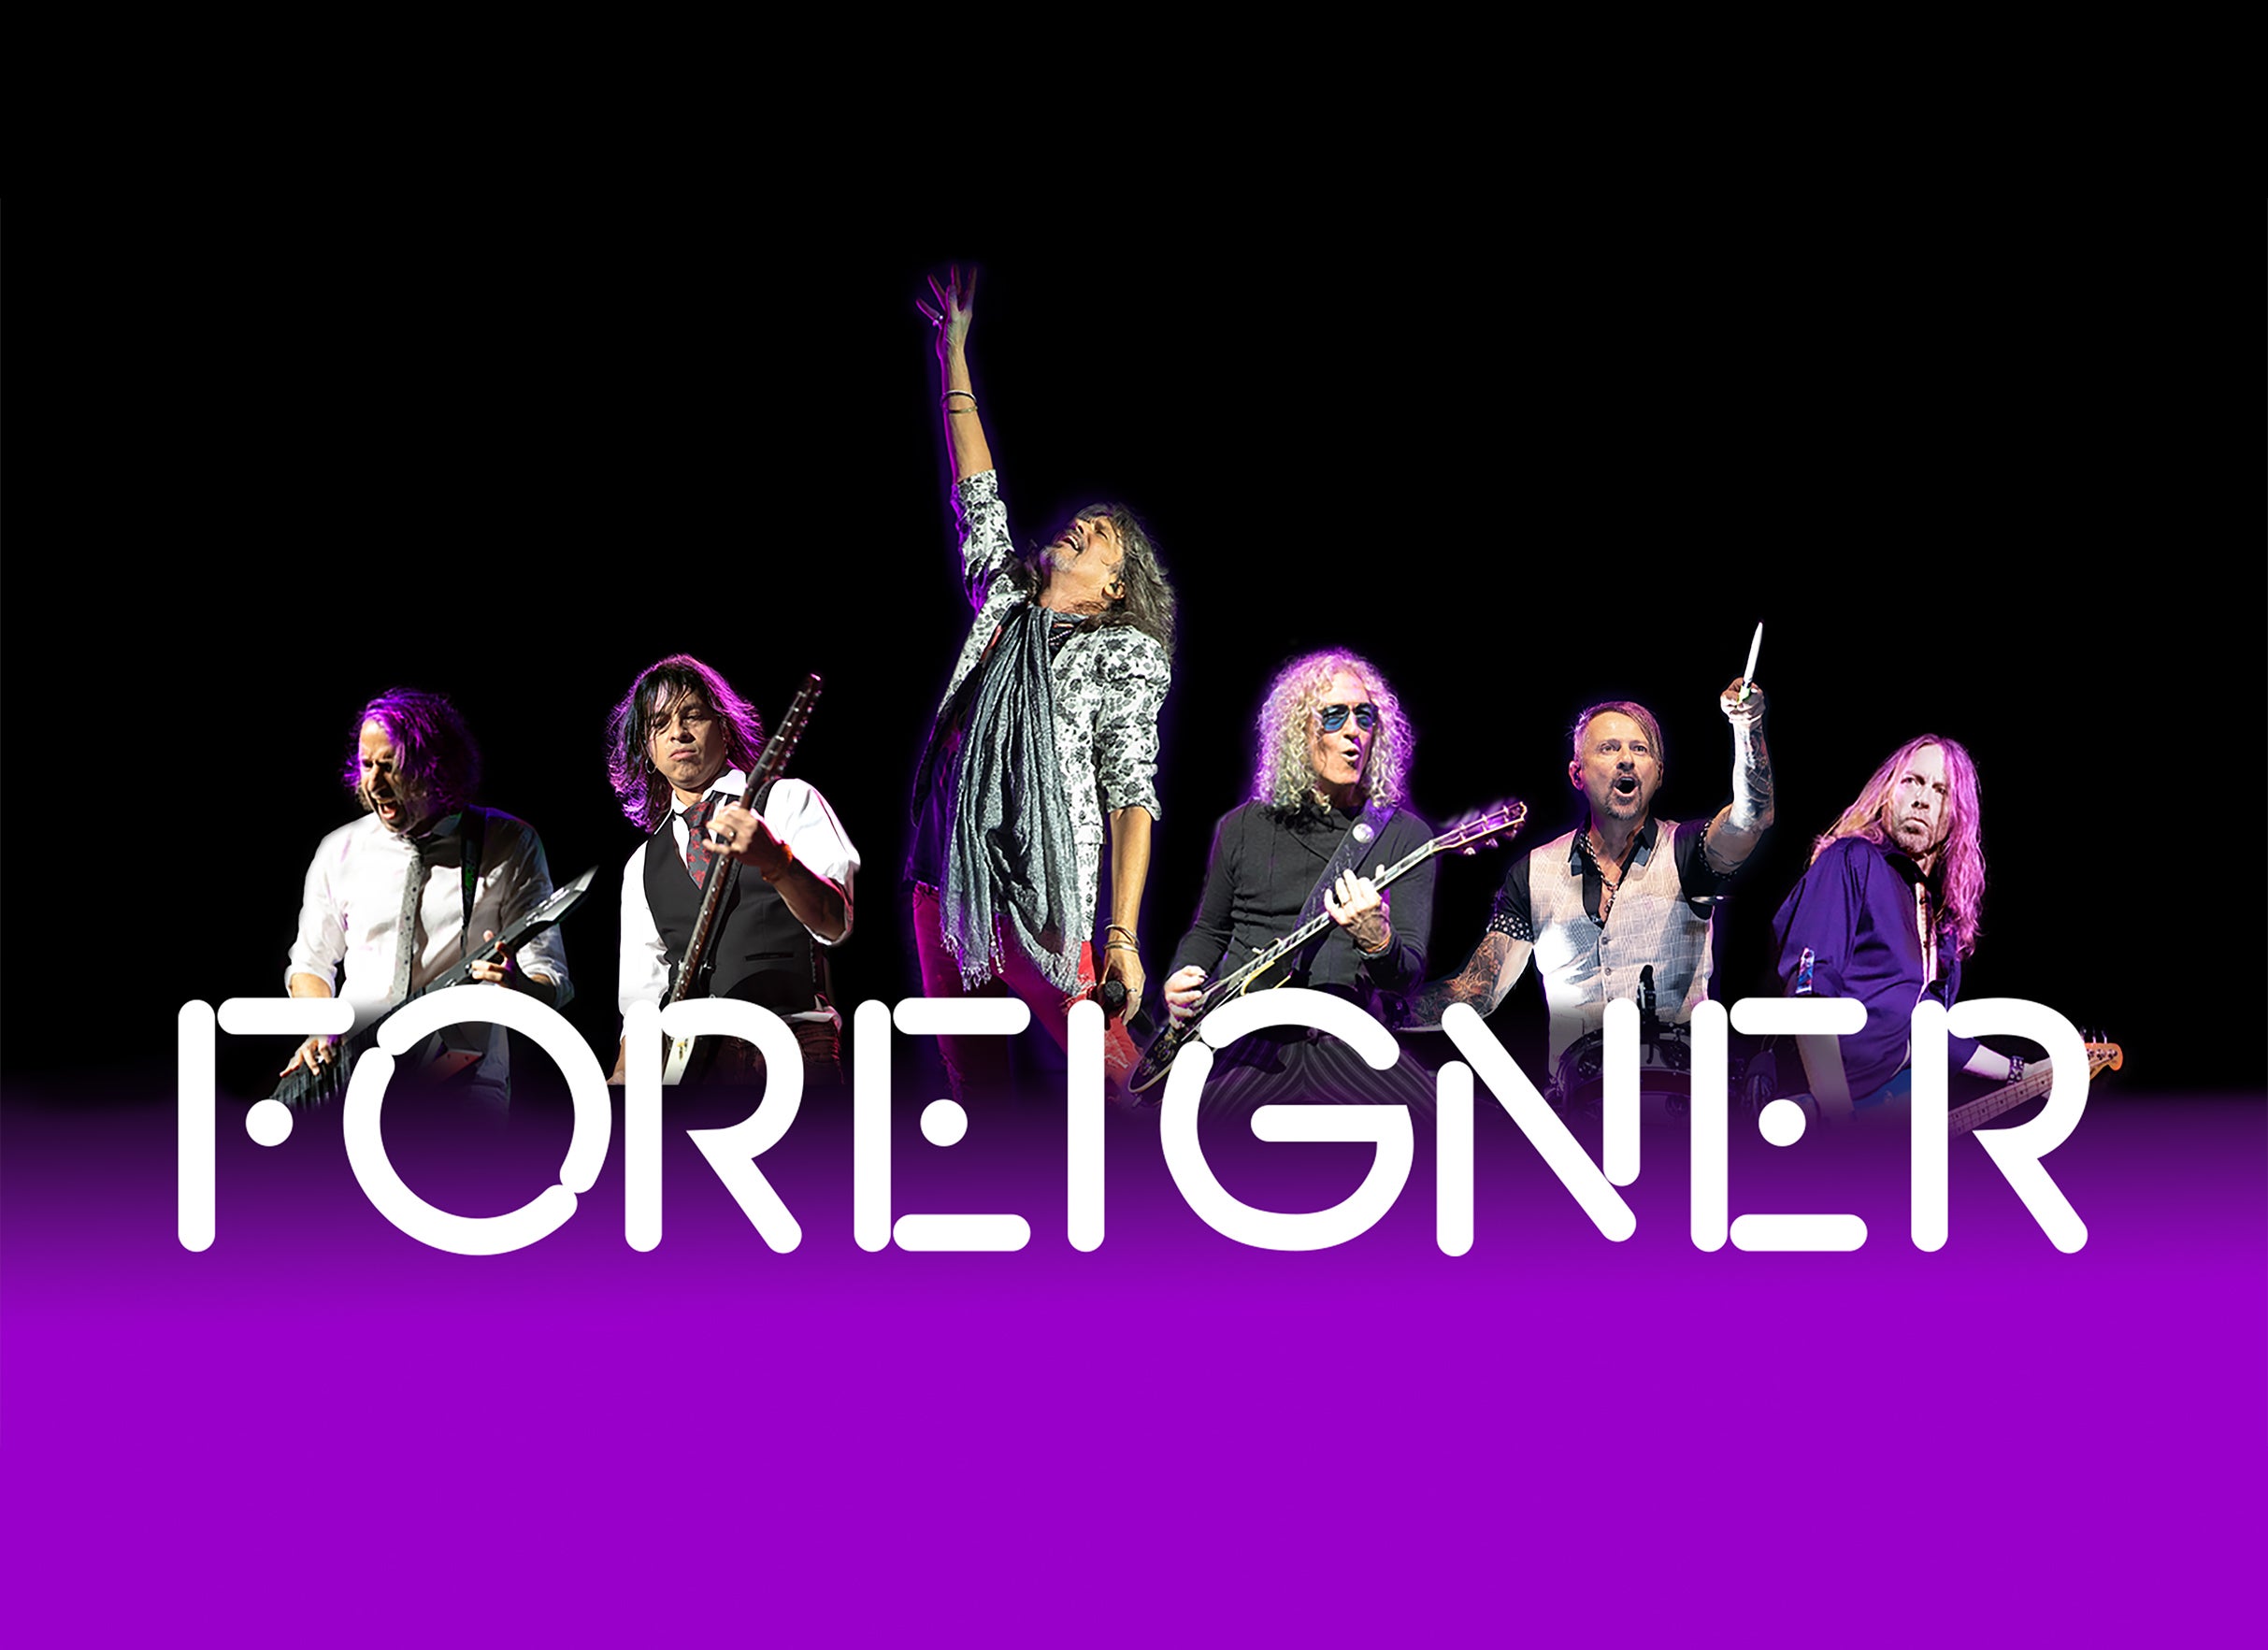 Foreigner & Styx with John Waite - Renegades and Juke Box Heroes Tour presale passwords